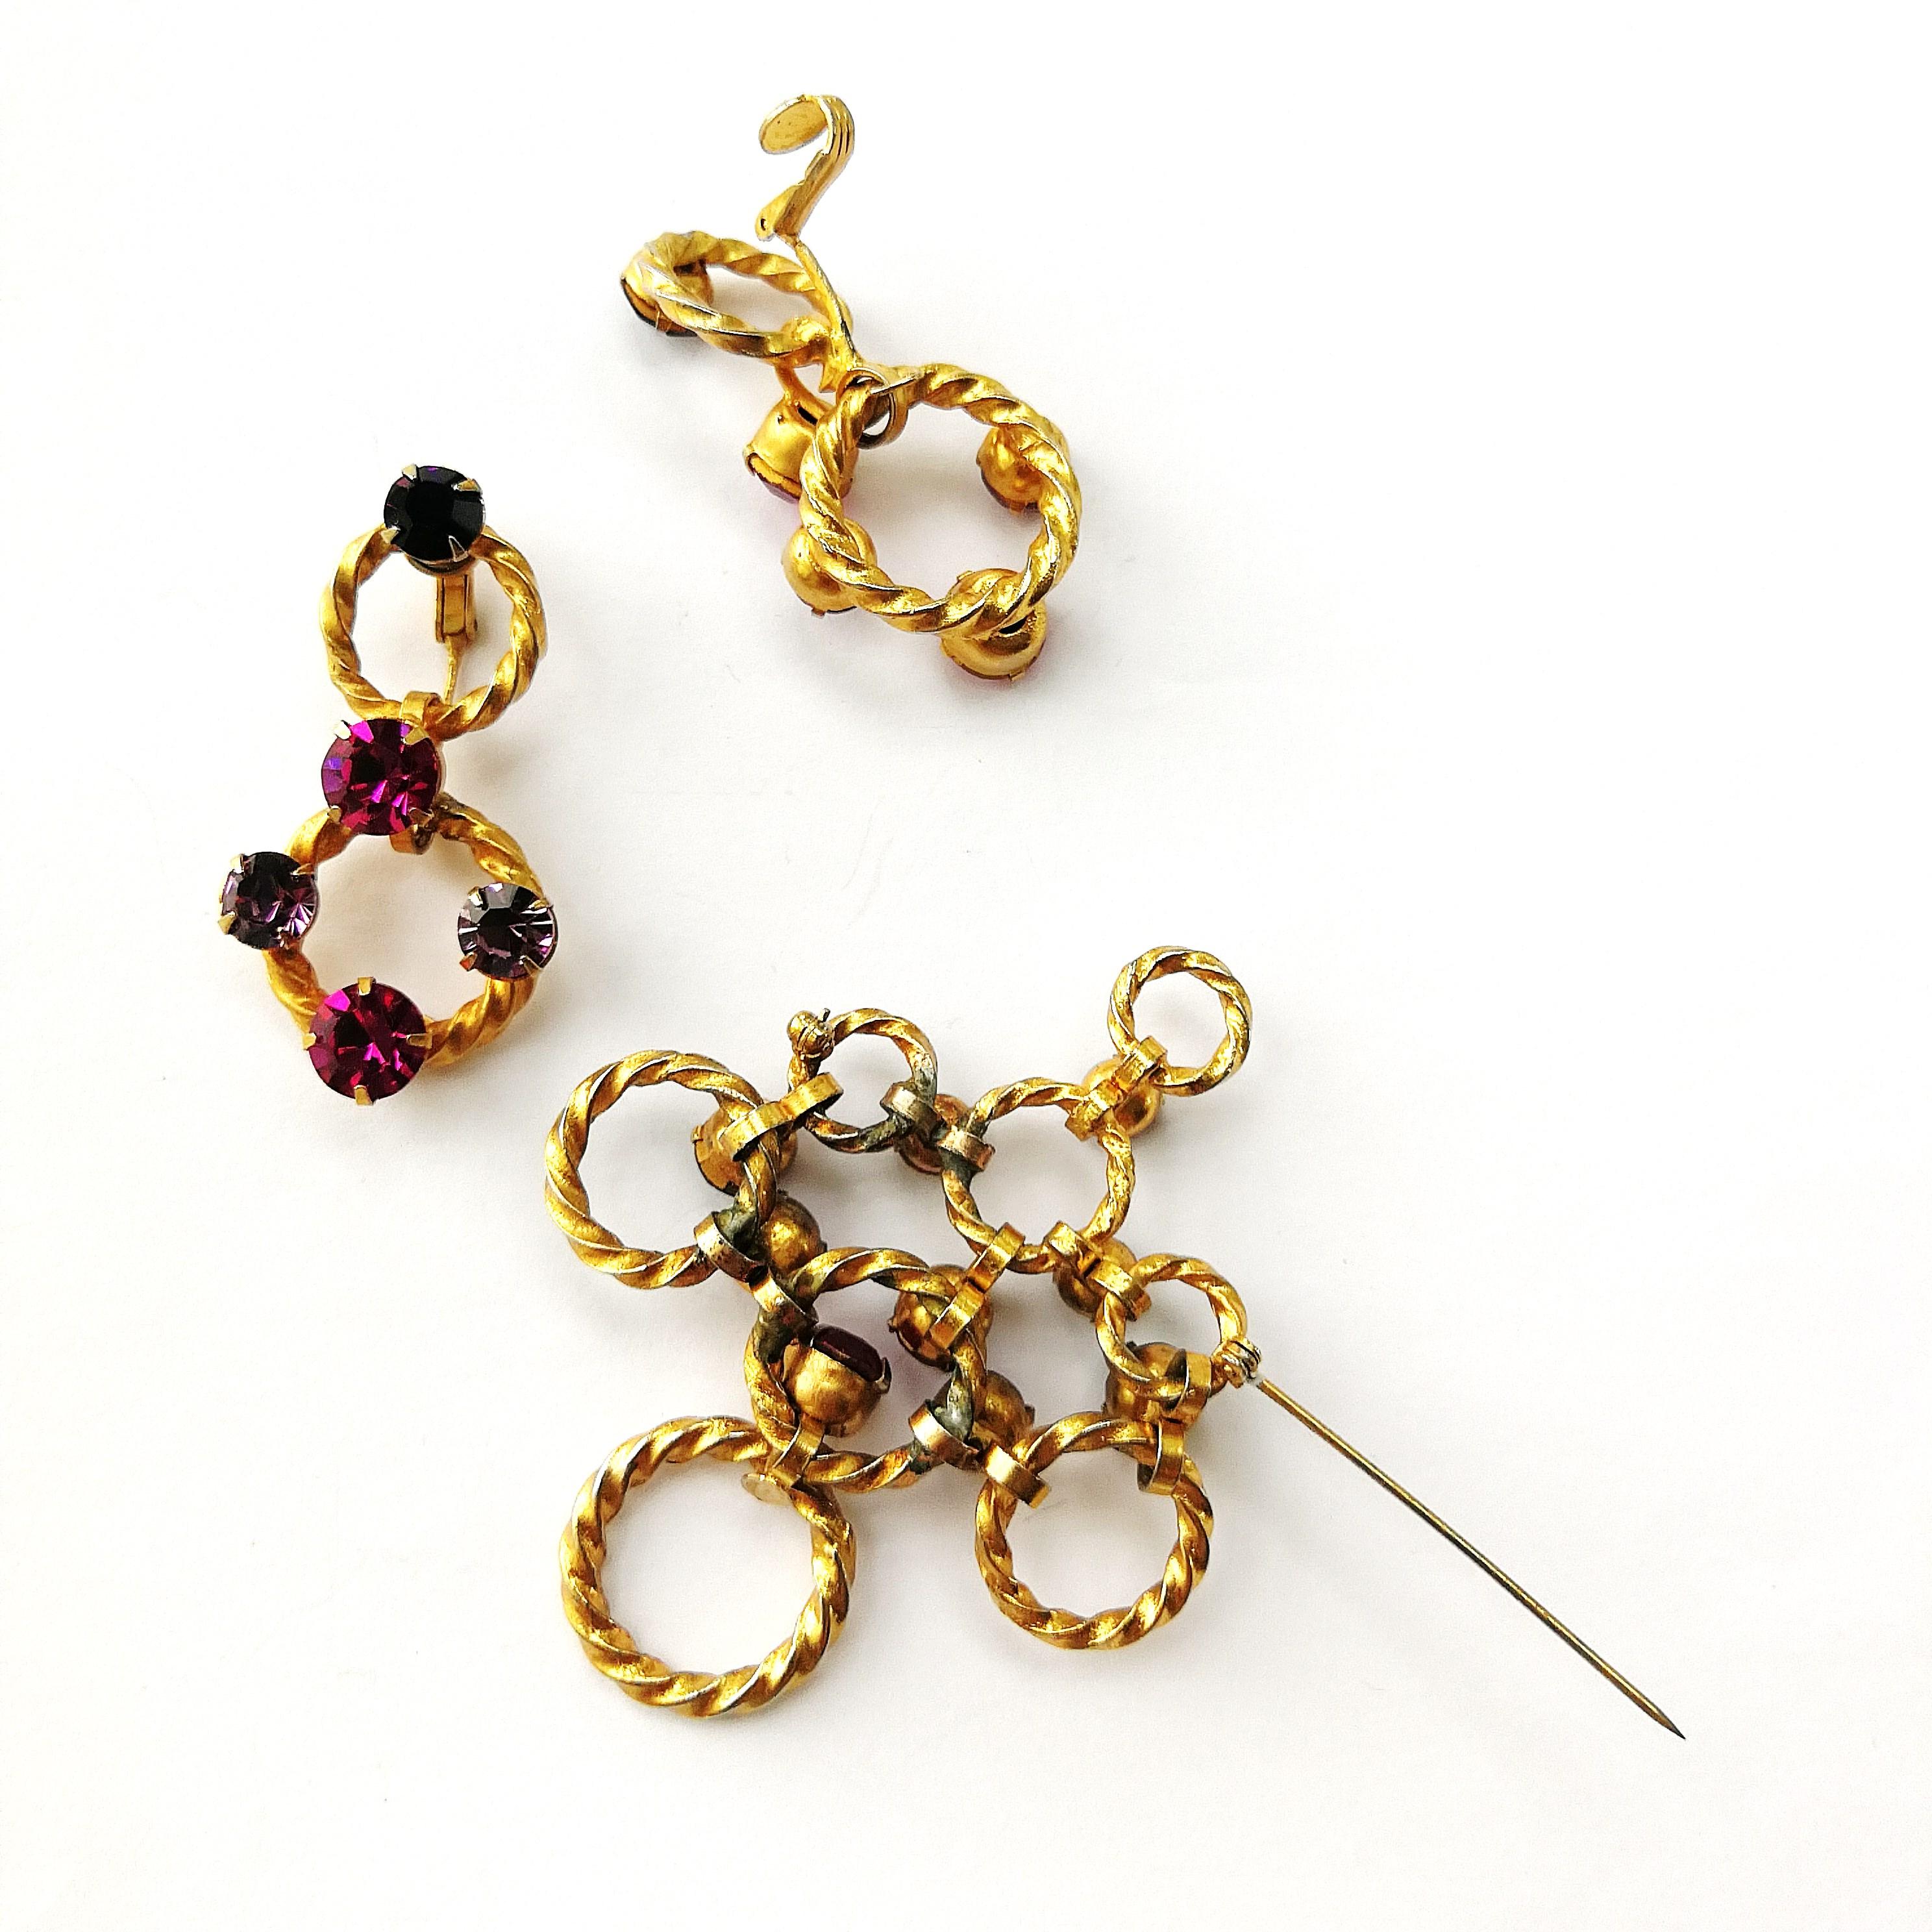 Gilt metal, fuschia and amethyst paste brooch/earrings, Christian Dior, c. 1954 For Sale 7